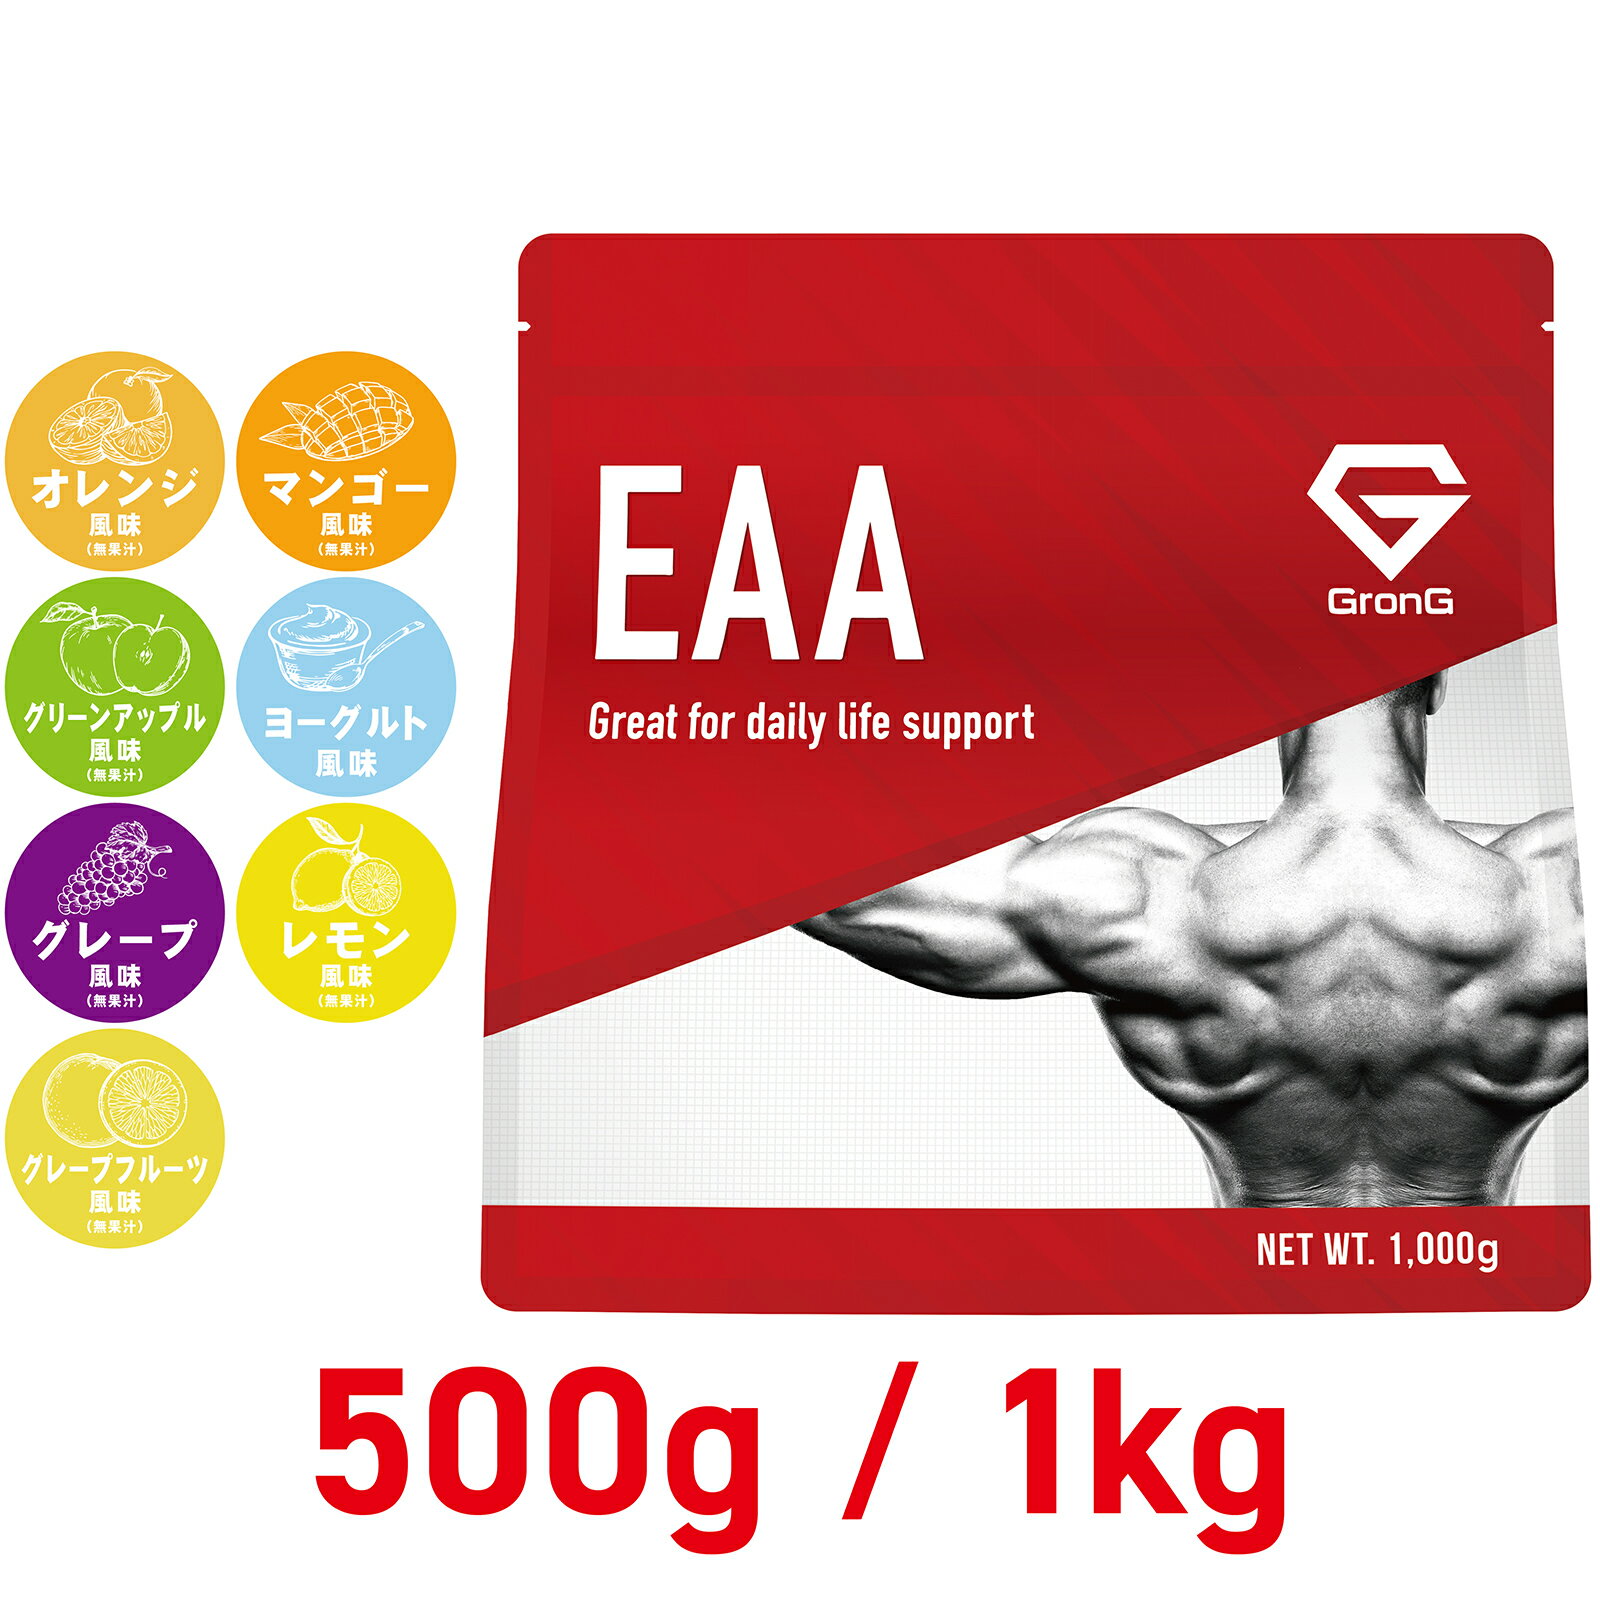  5  GronG(OO) EAA K{A~m  t 500g 1kg